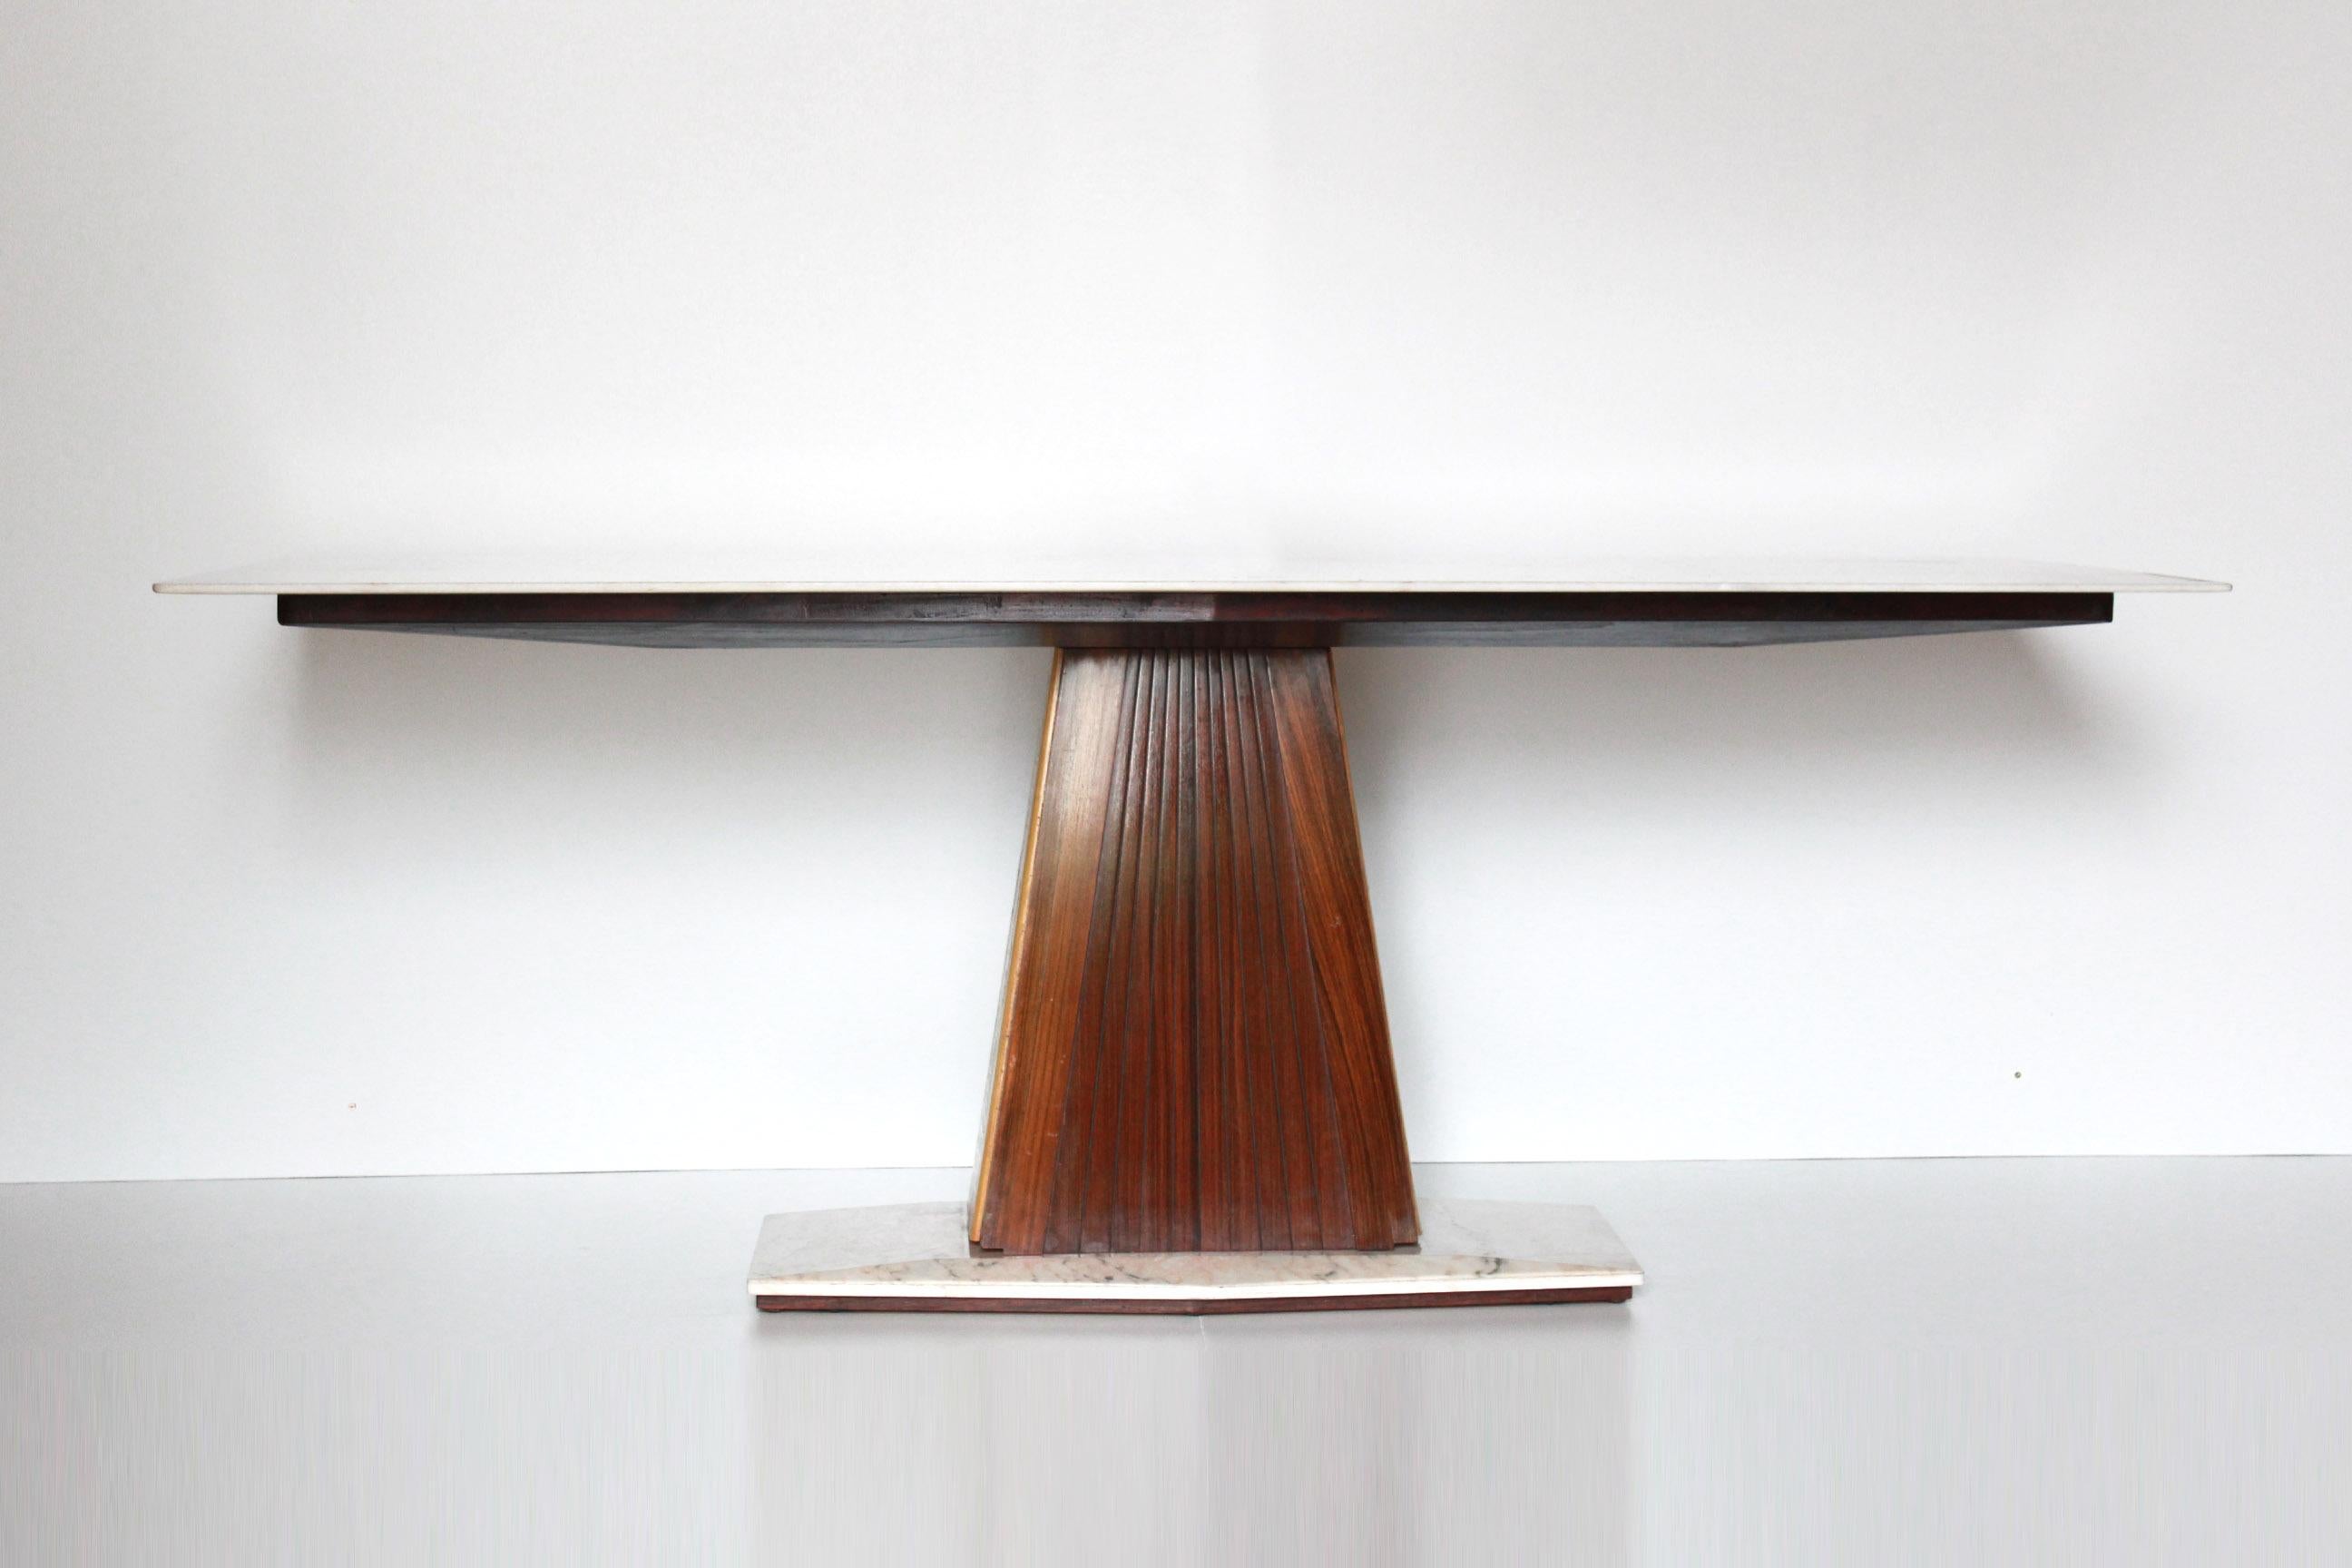 A 1960s design vintage marble dining table by iconic Italian manufacturer 